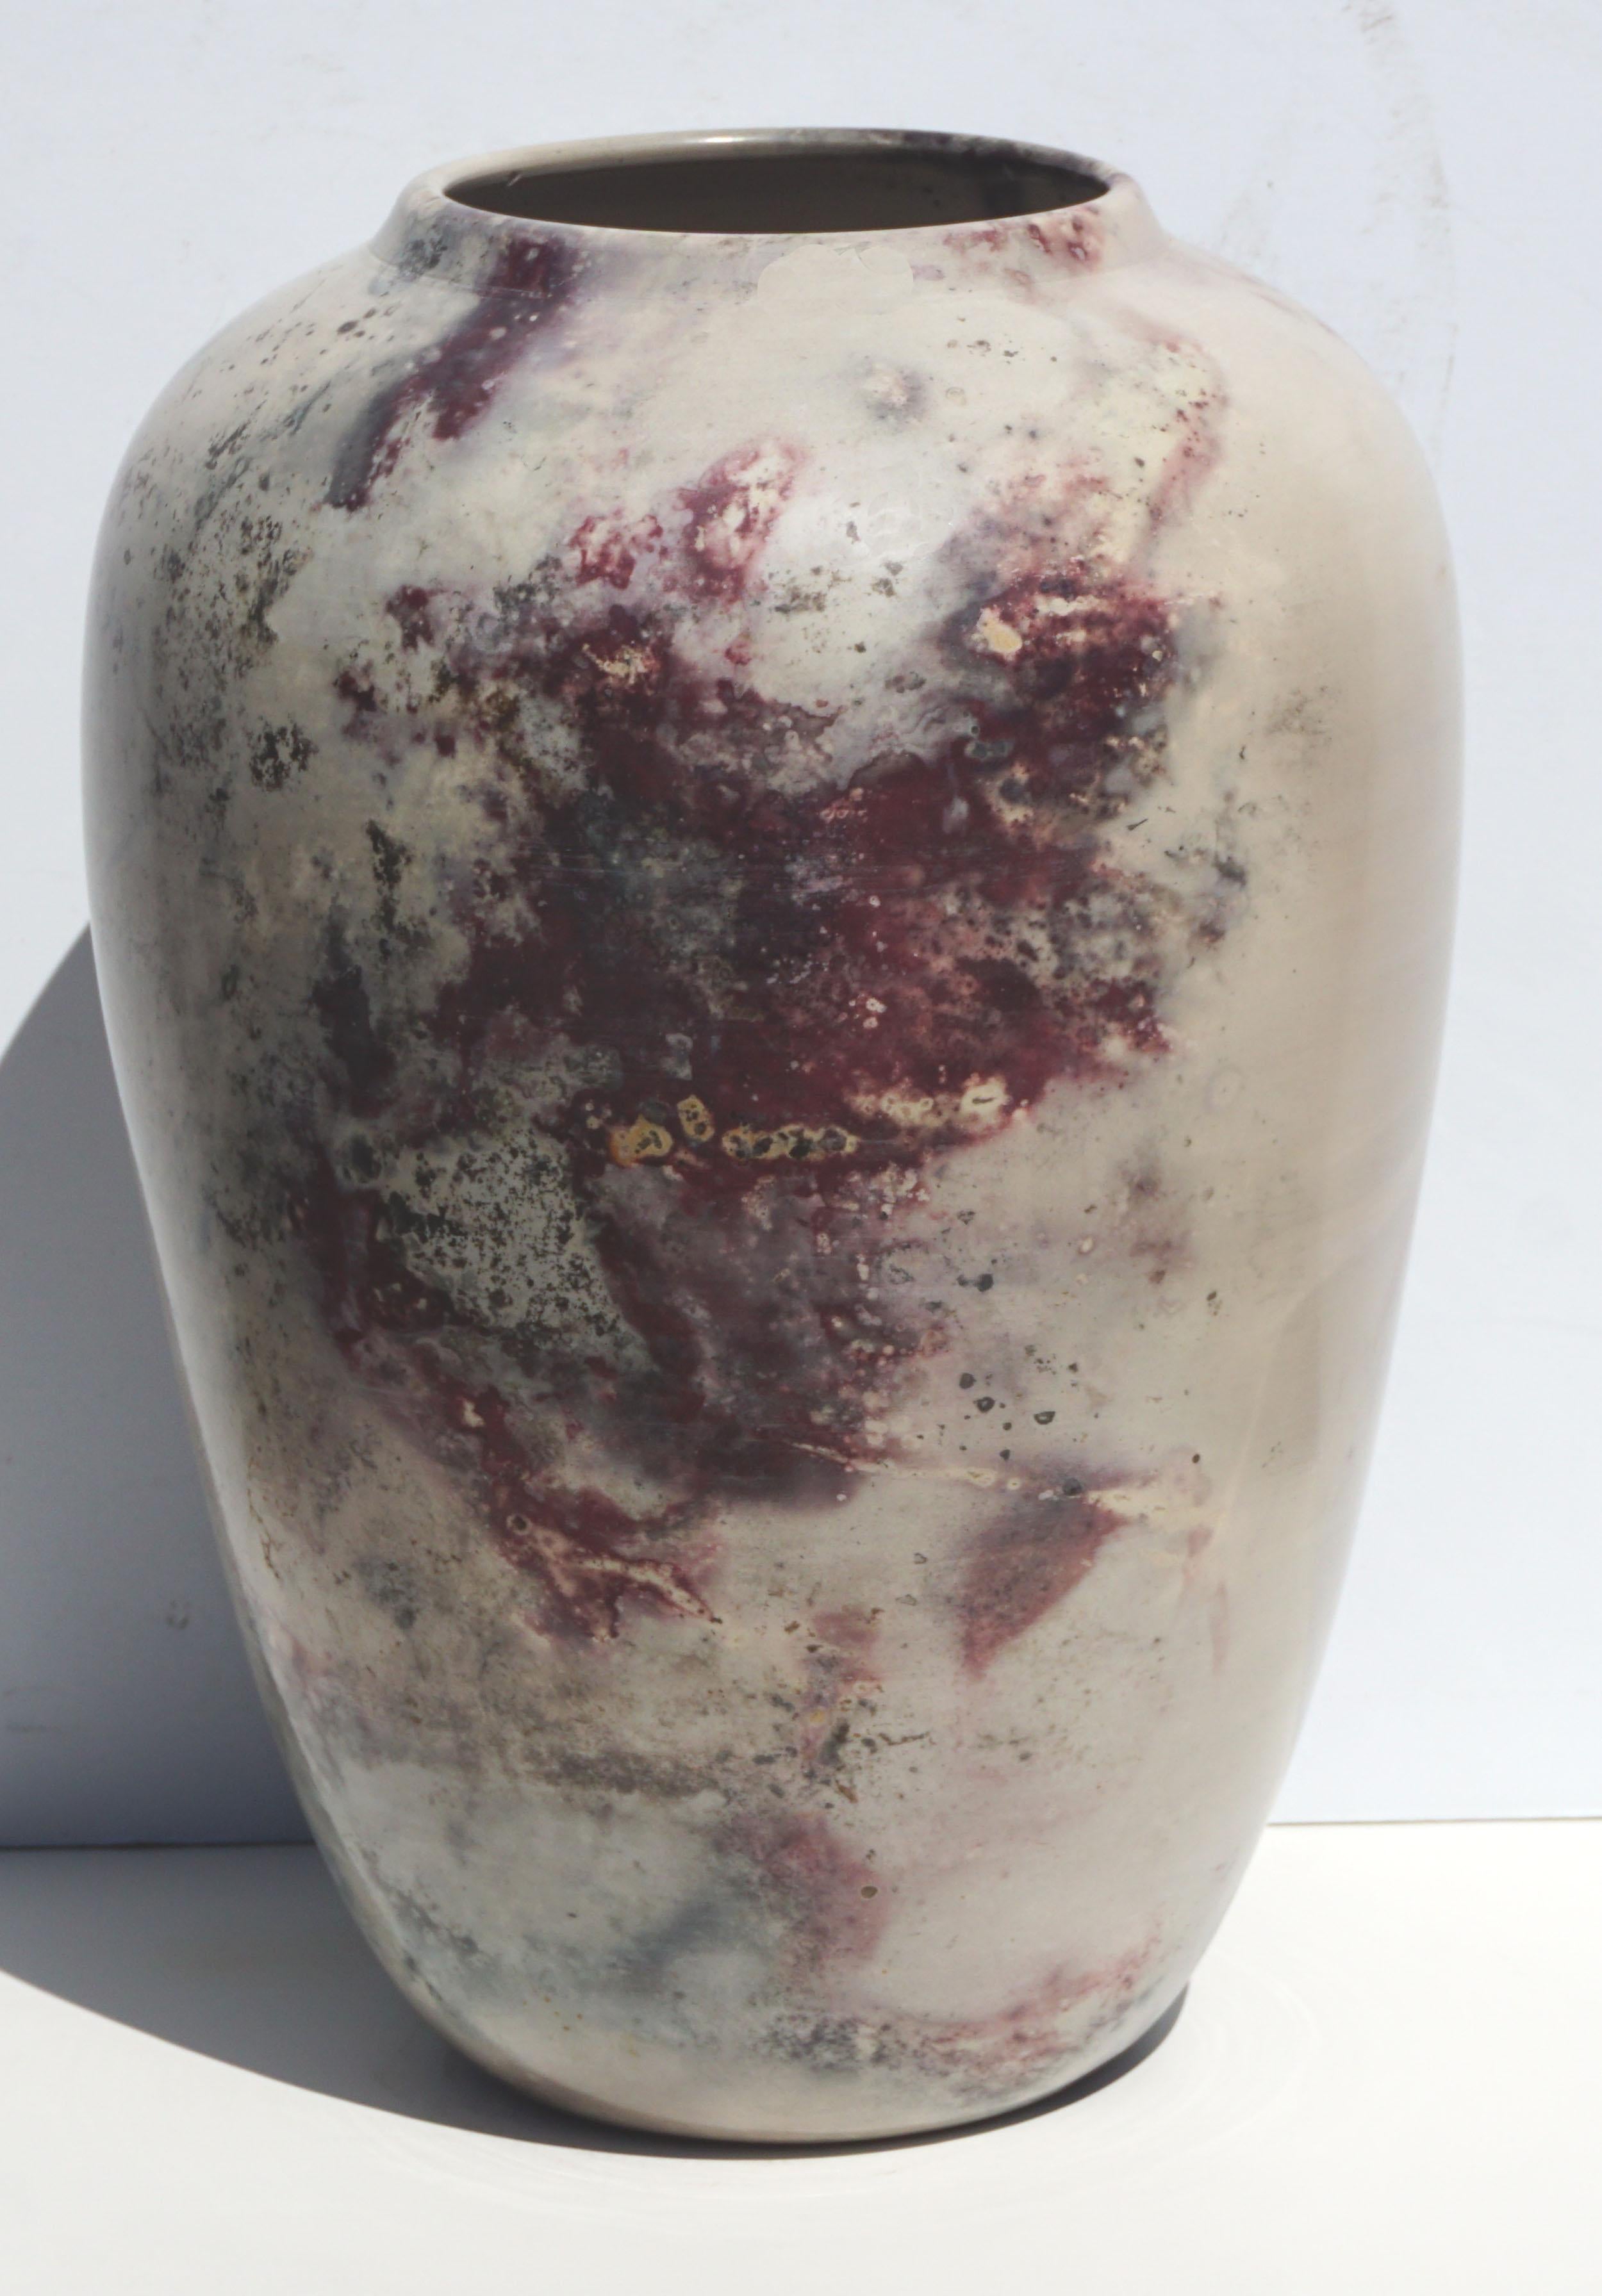 Dramatic raku style ceramic vase by Northern California ceramic artist Joel Magen (American, 1940-2016), 1992. Creams, light grays and burgundy with large dramatic slash of black create an organic and Asian aesthetic. Signed and dated on bottom.